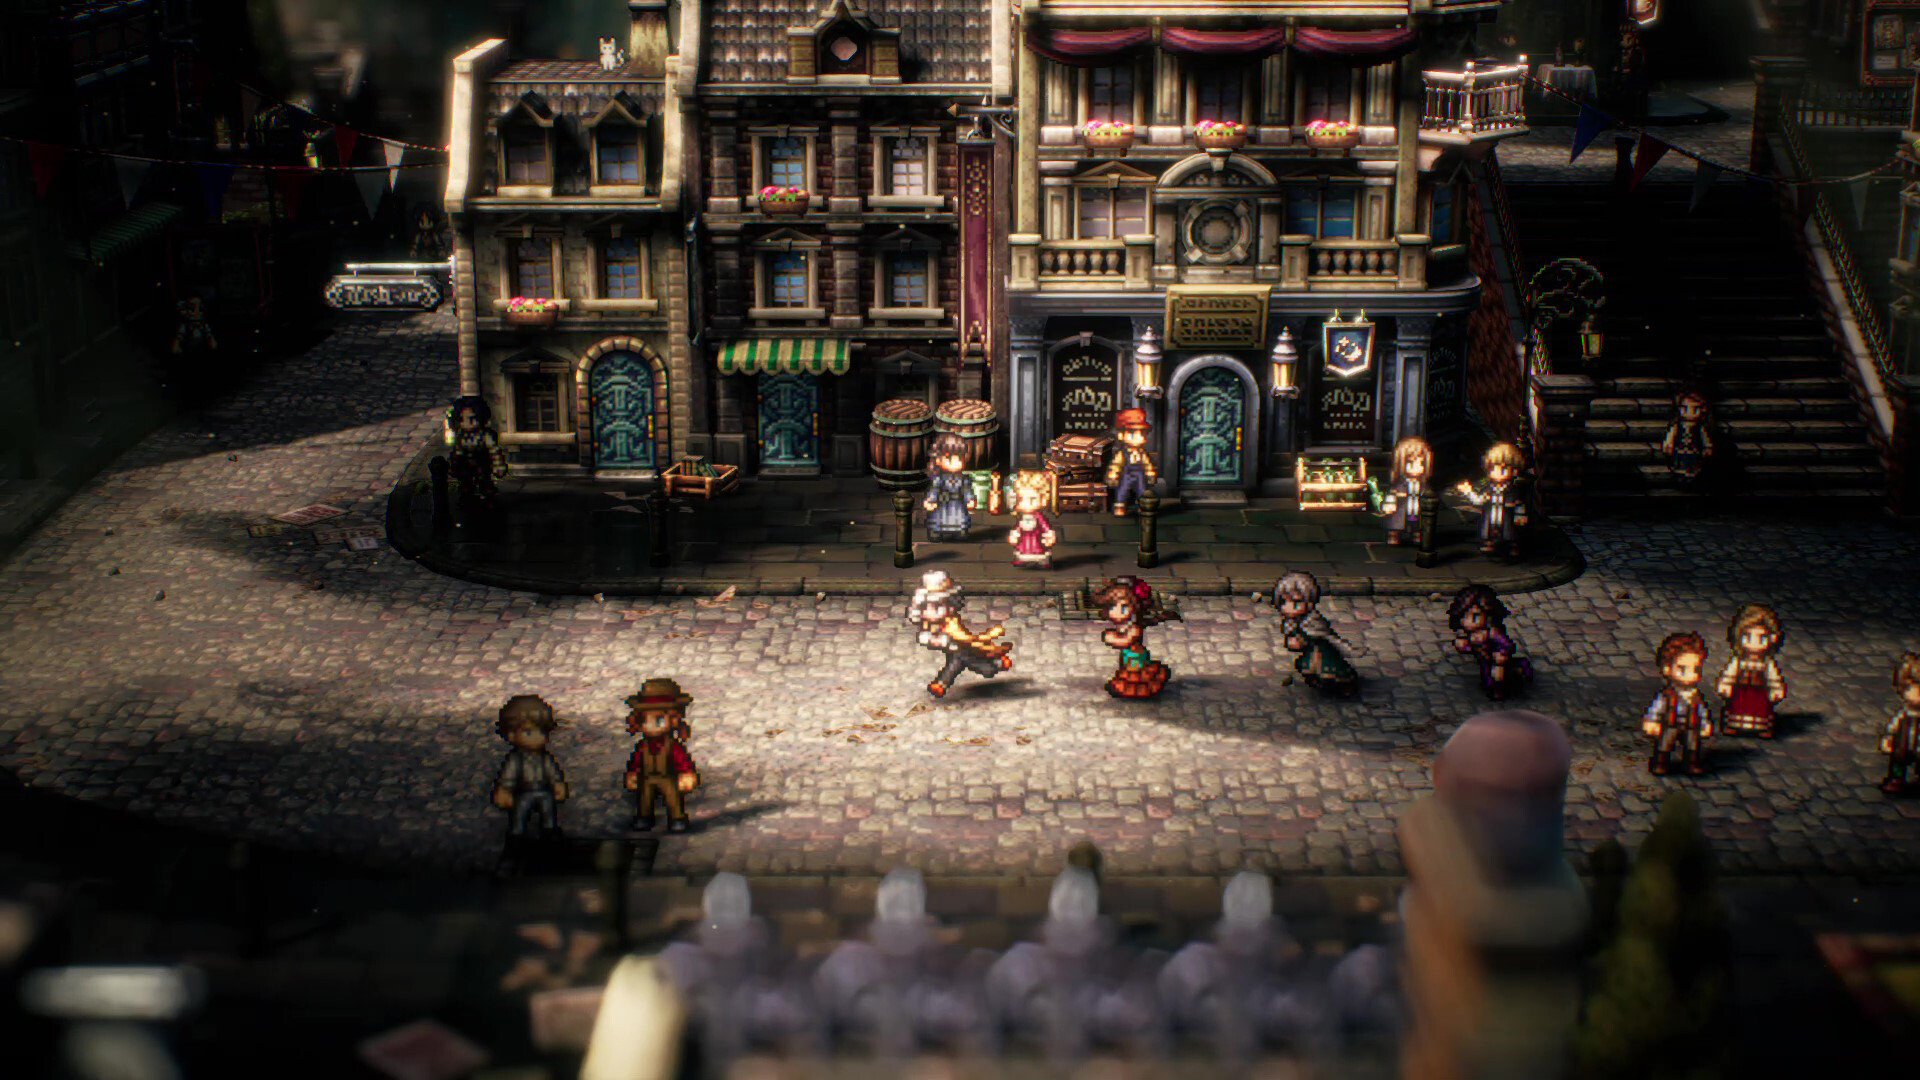 Octopath Traveler 2 and Bravely Default 2 are Good Omens for